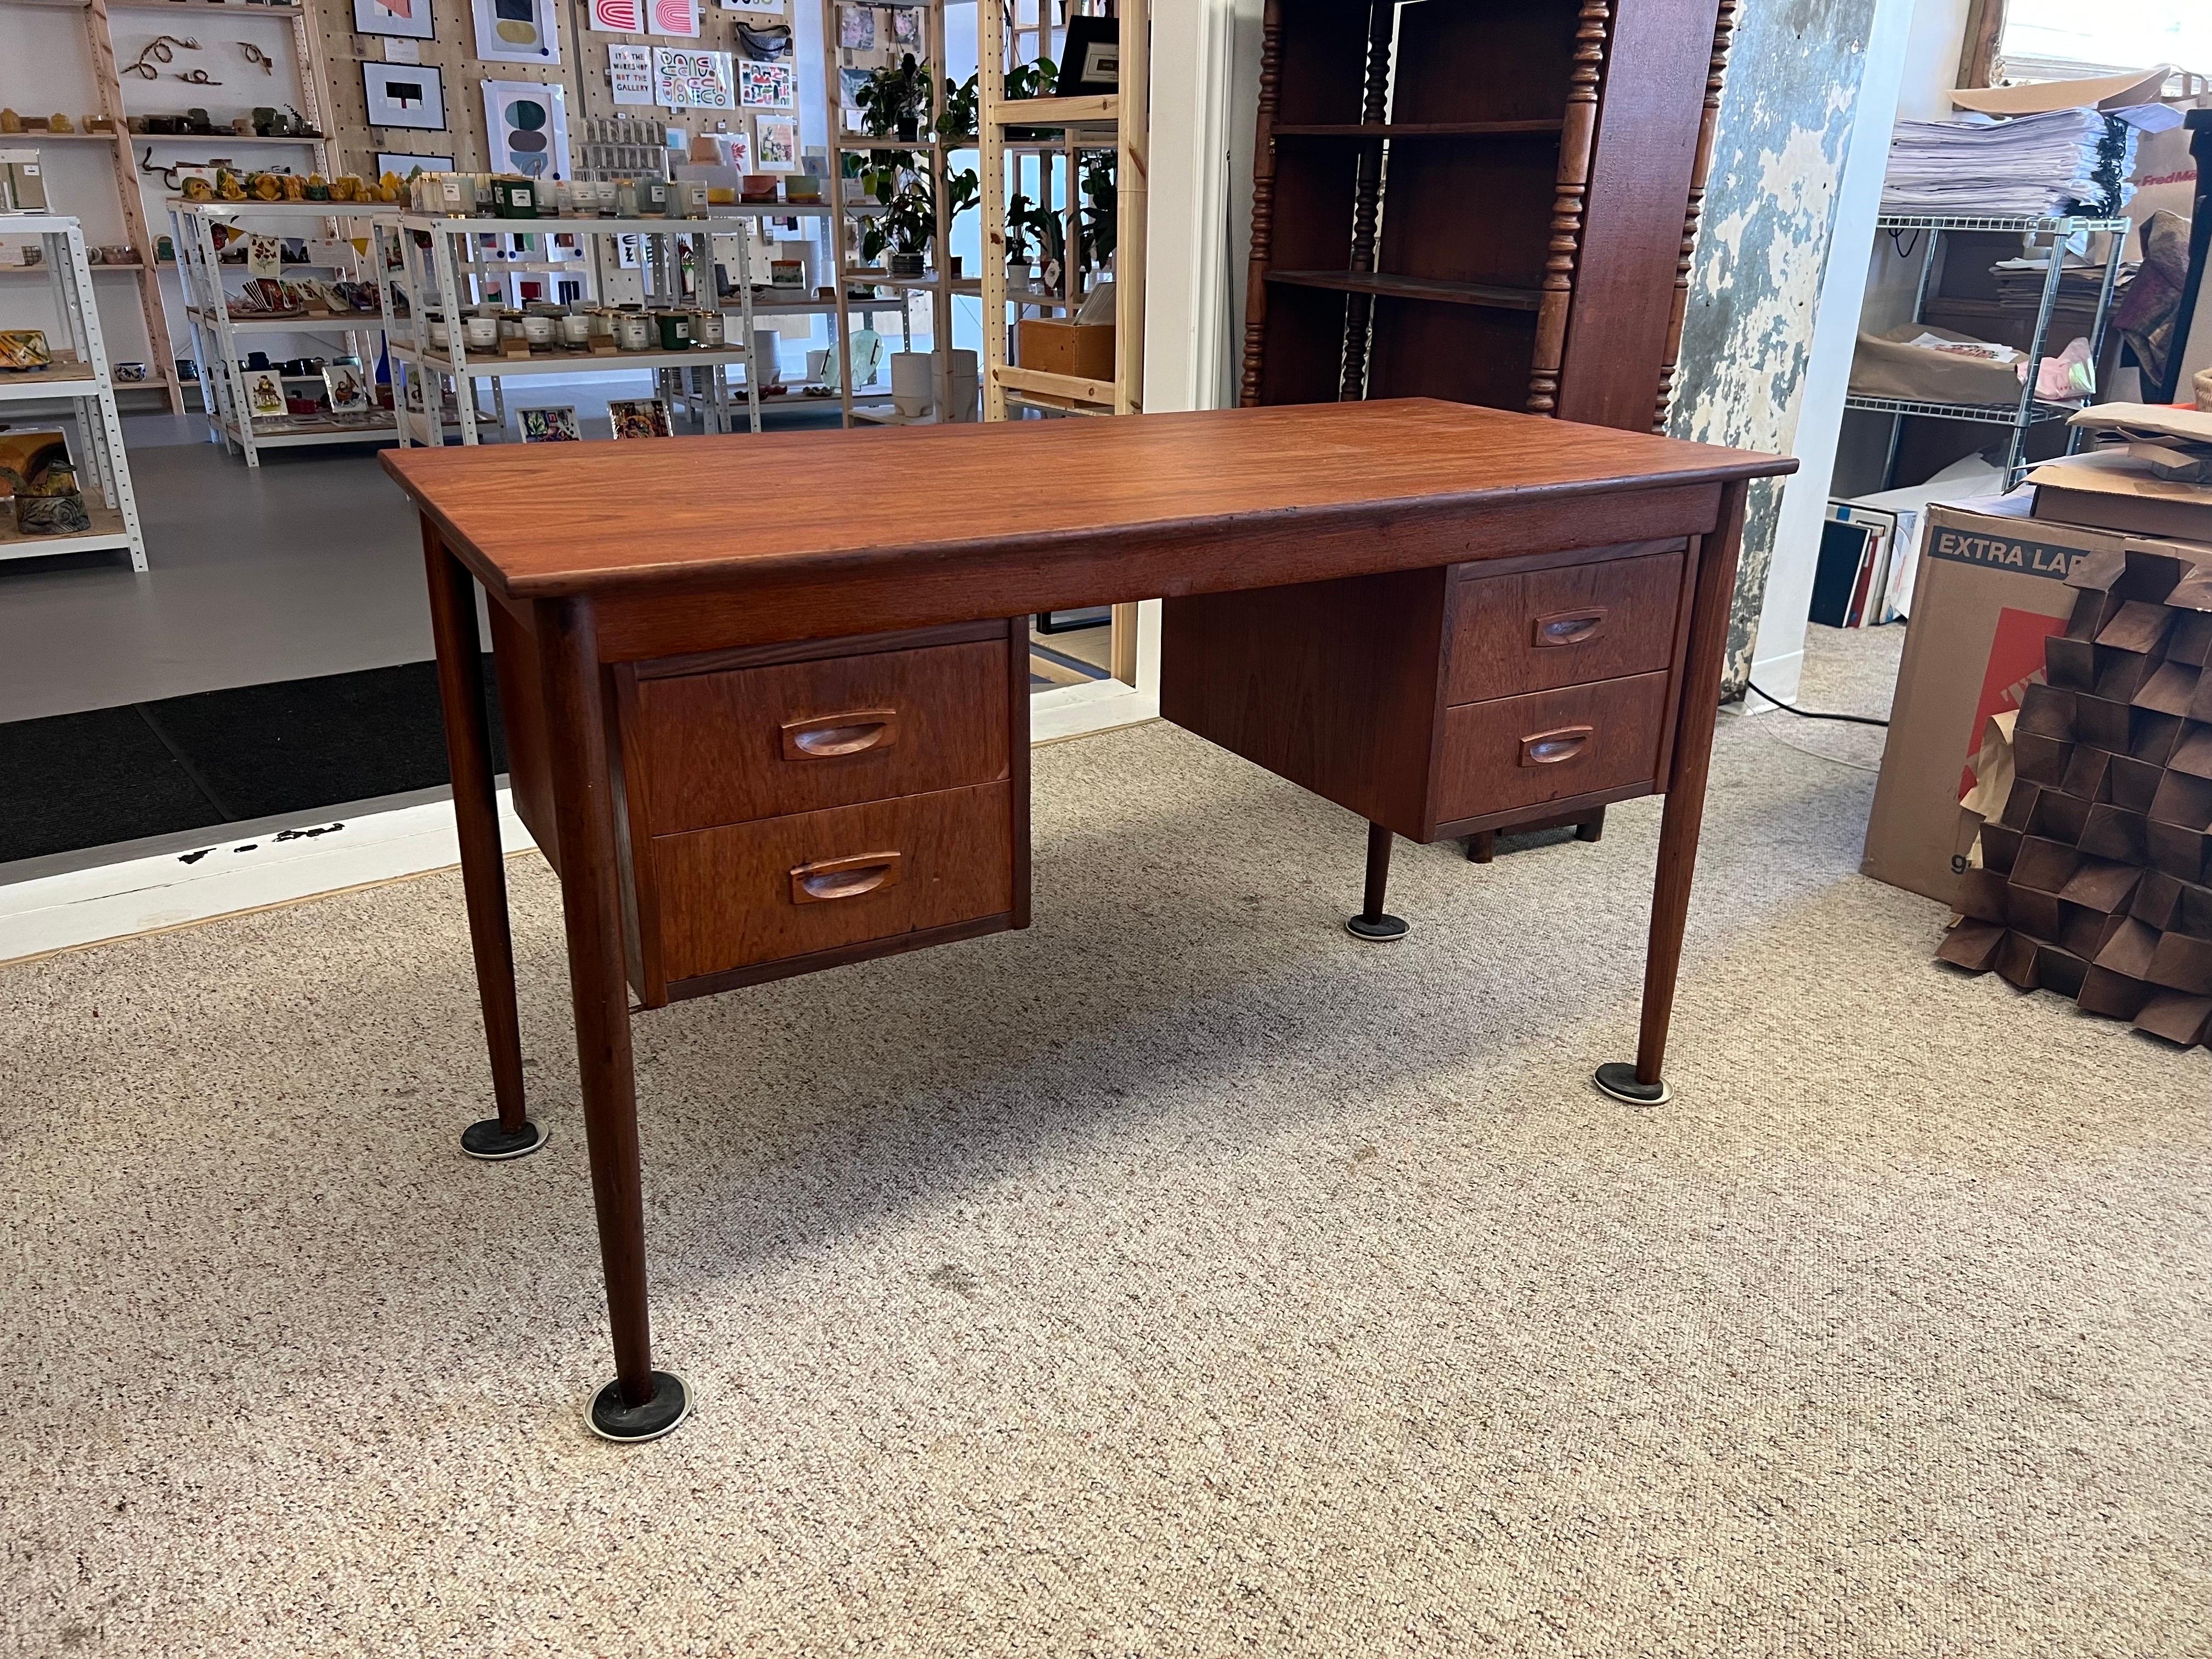 Danish Mid-Century Modern Writing Desk with Dovetail Drawers. Finished Back

Dimensions. 49 W ; 23 D ; 28 1/2 H
Knee Clearance. 17 W ; 25 1/2 H.